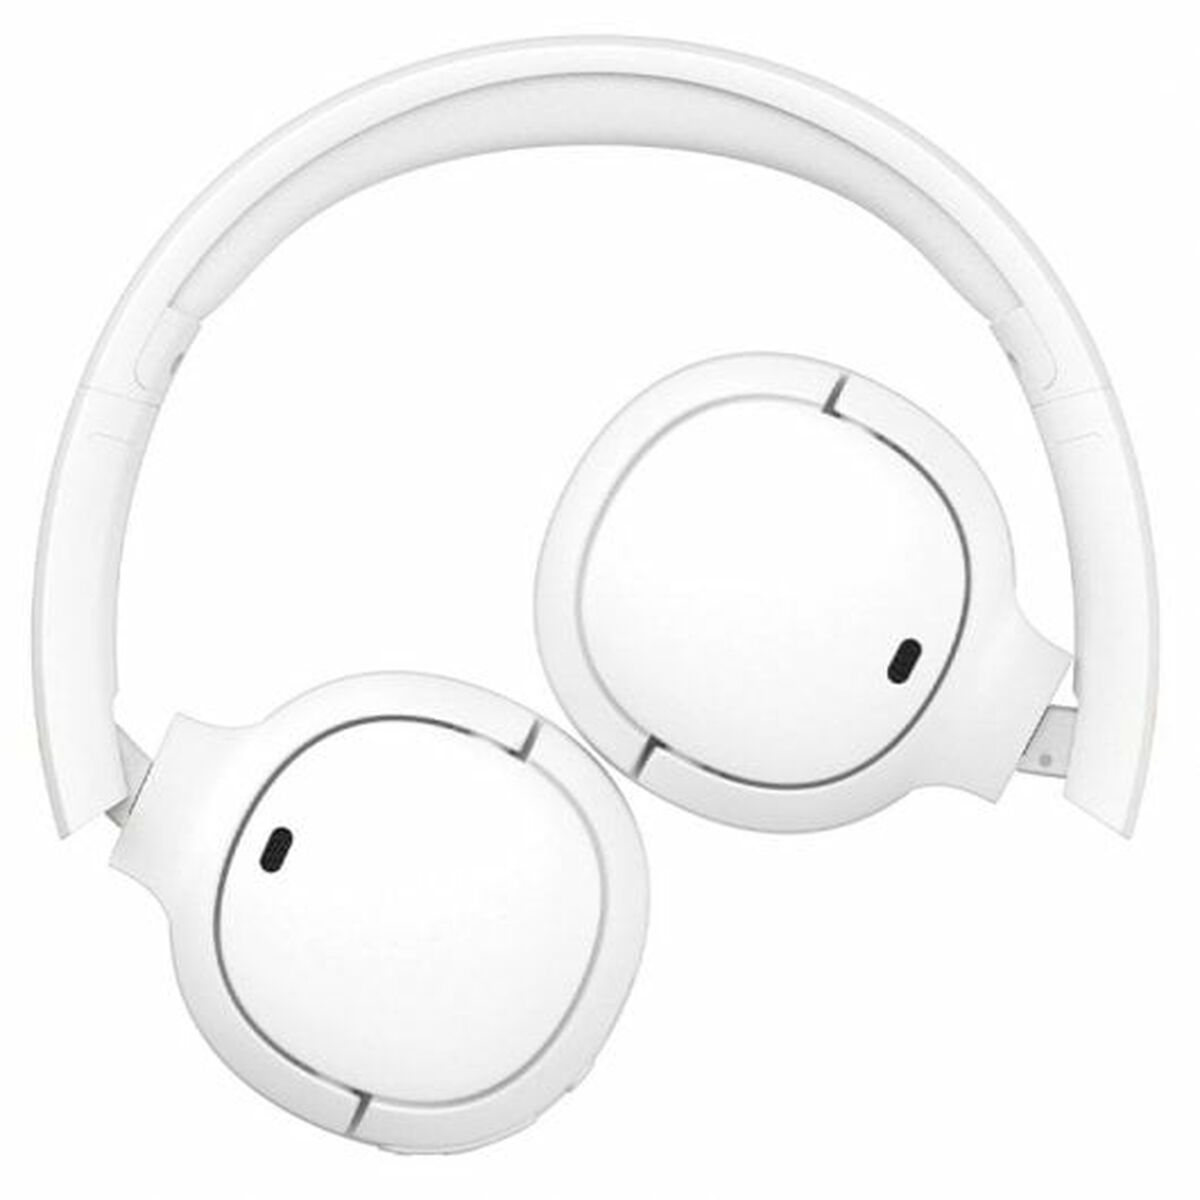 Bluetooth Headset with Microphone Edifier WH500 White